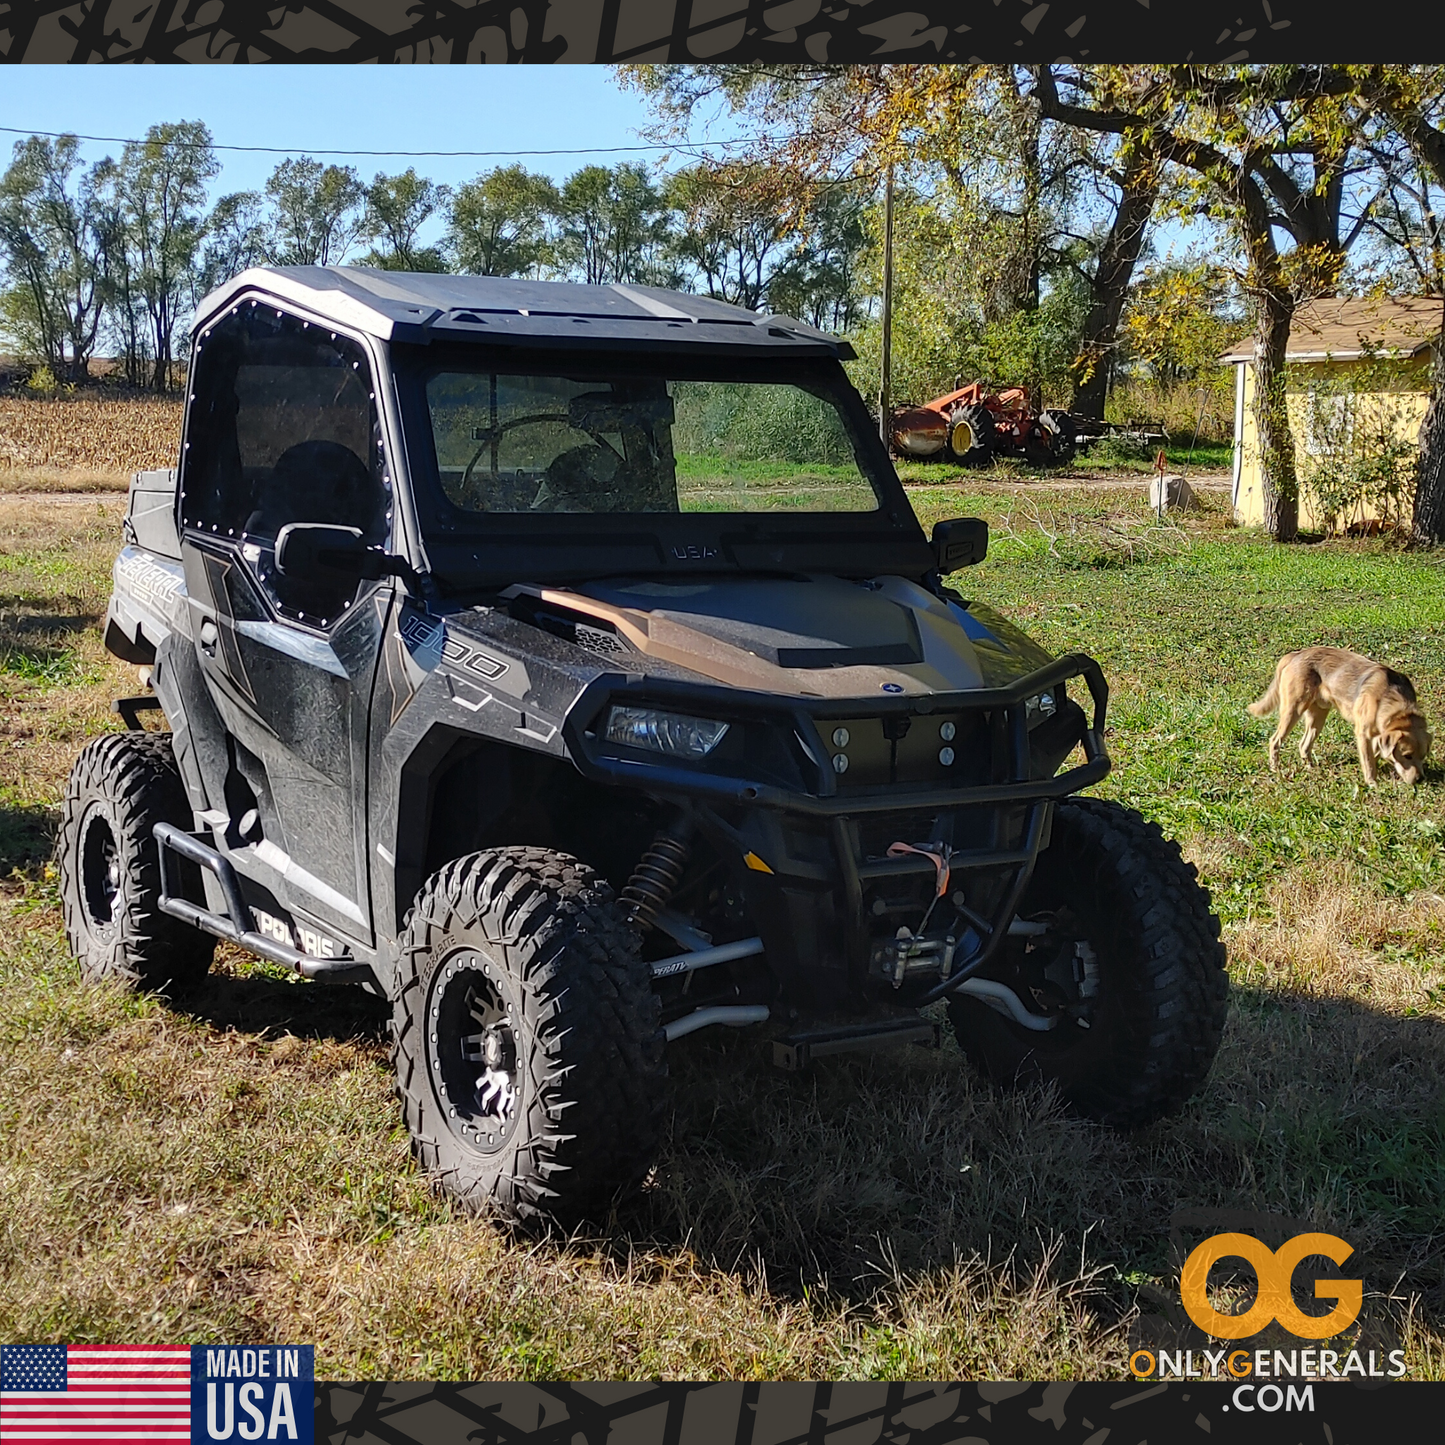 Showing the Polaris General Eliminator grill cover by OnlyGenerals installed on a two seat General with OG SideskinLITE upper doors.